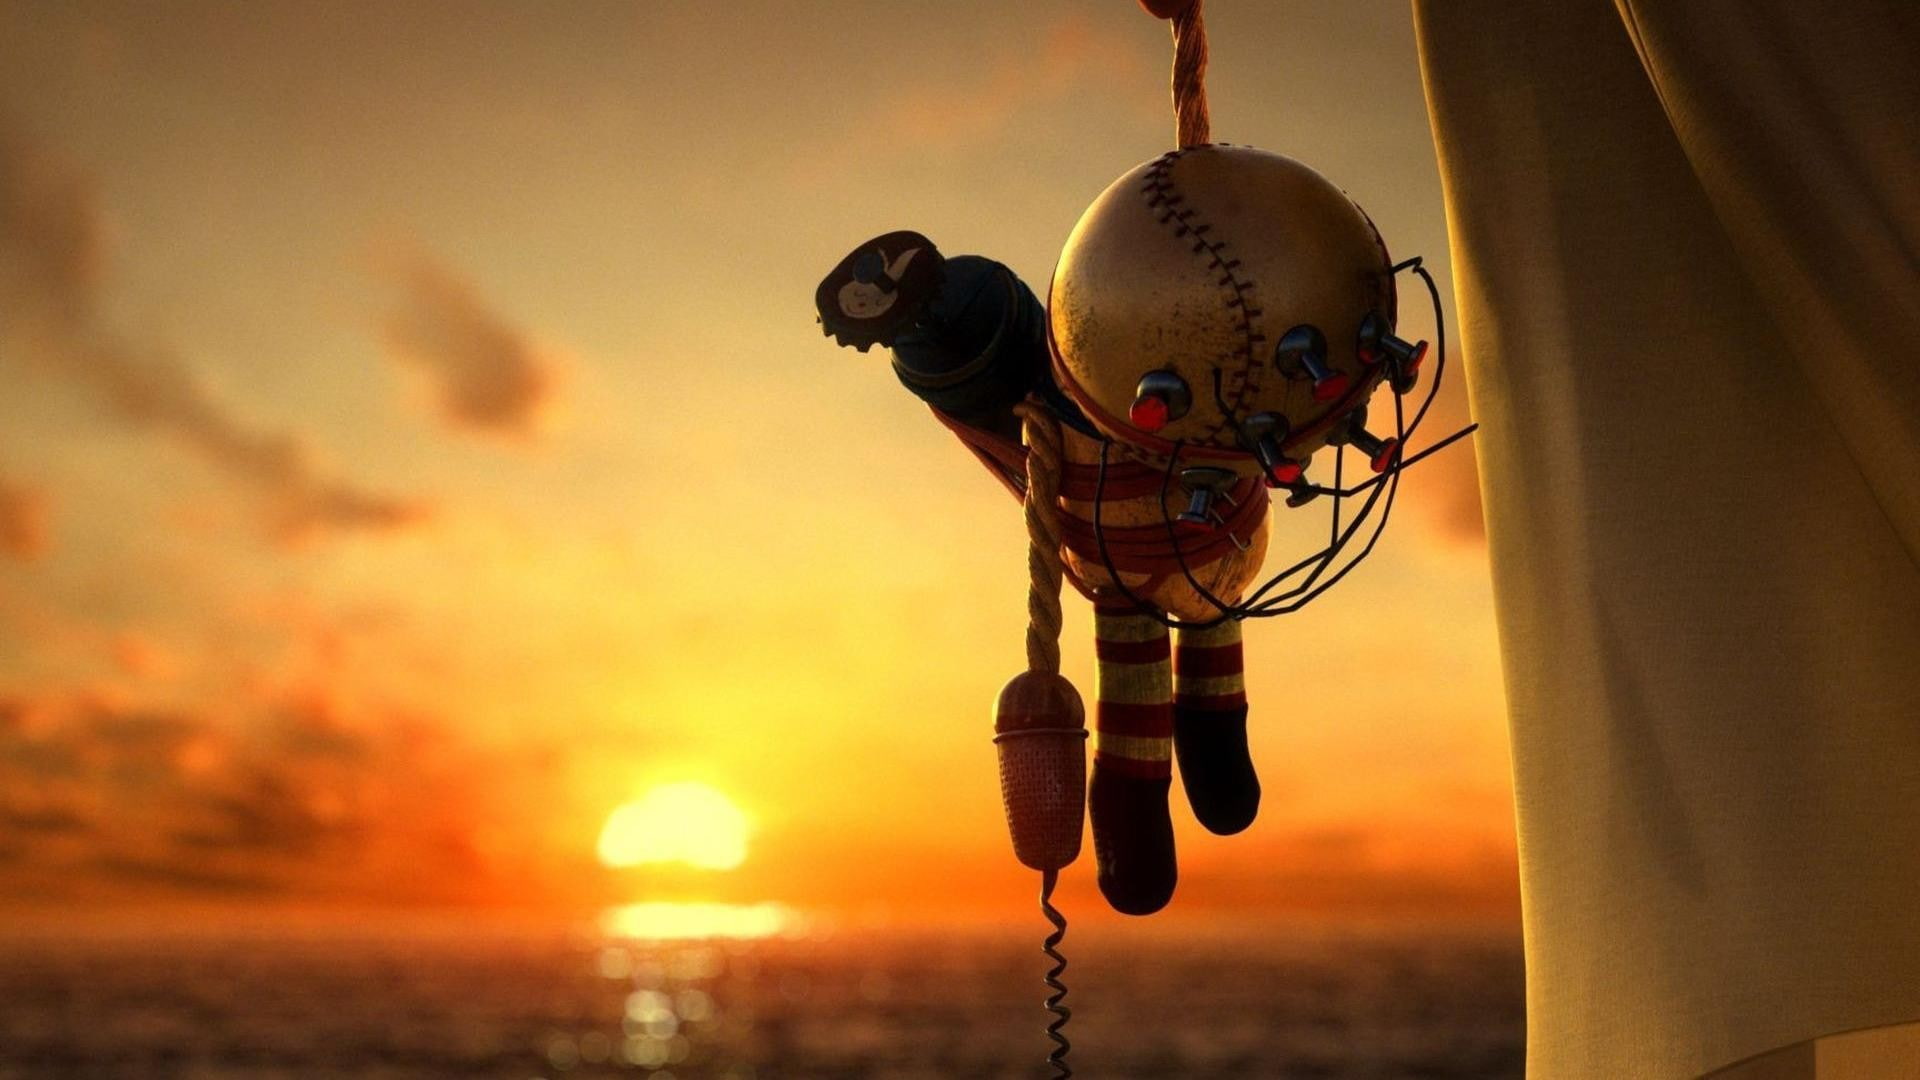 abstract toy baseball sunset sea unravel, sky, hanging, cloud - sky